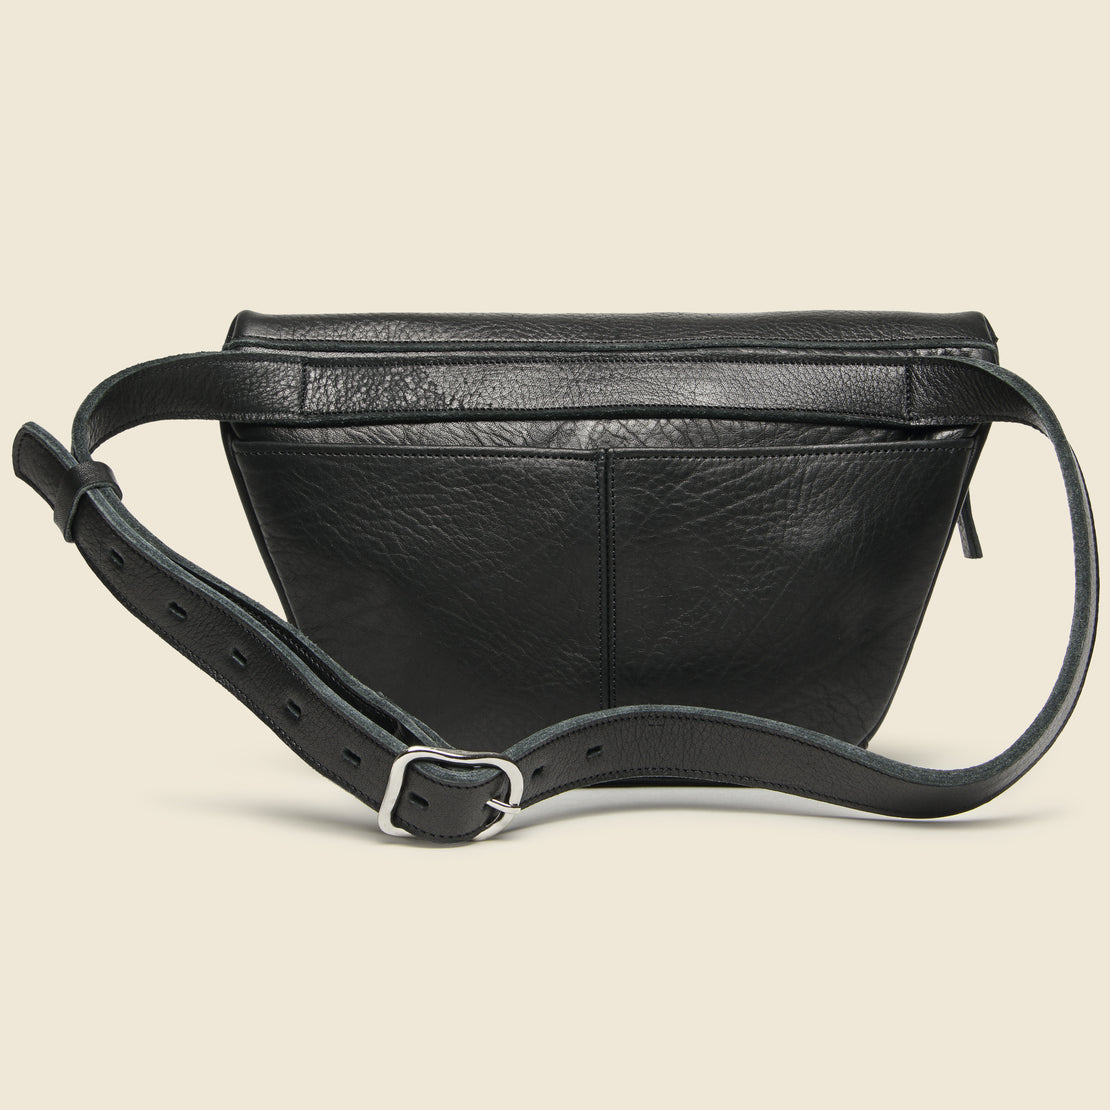 Ombu Leather Fannypack - Black - Nimes - STAG Provisions - W - Accessories - Bag